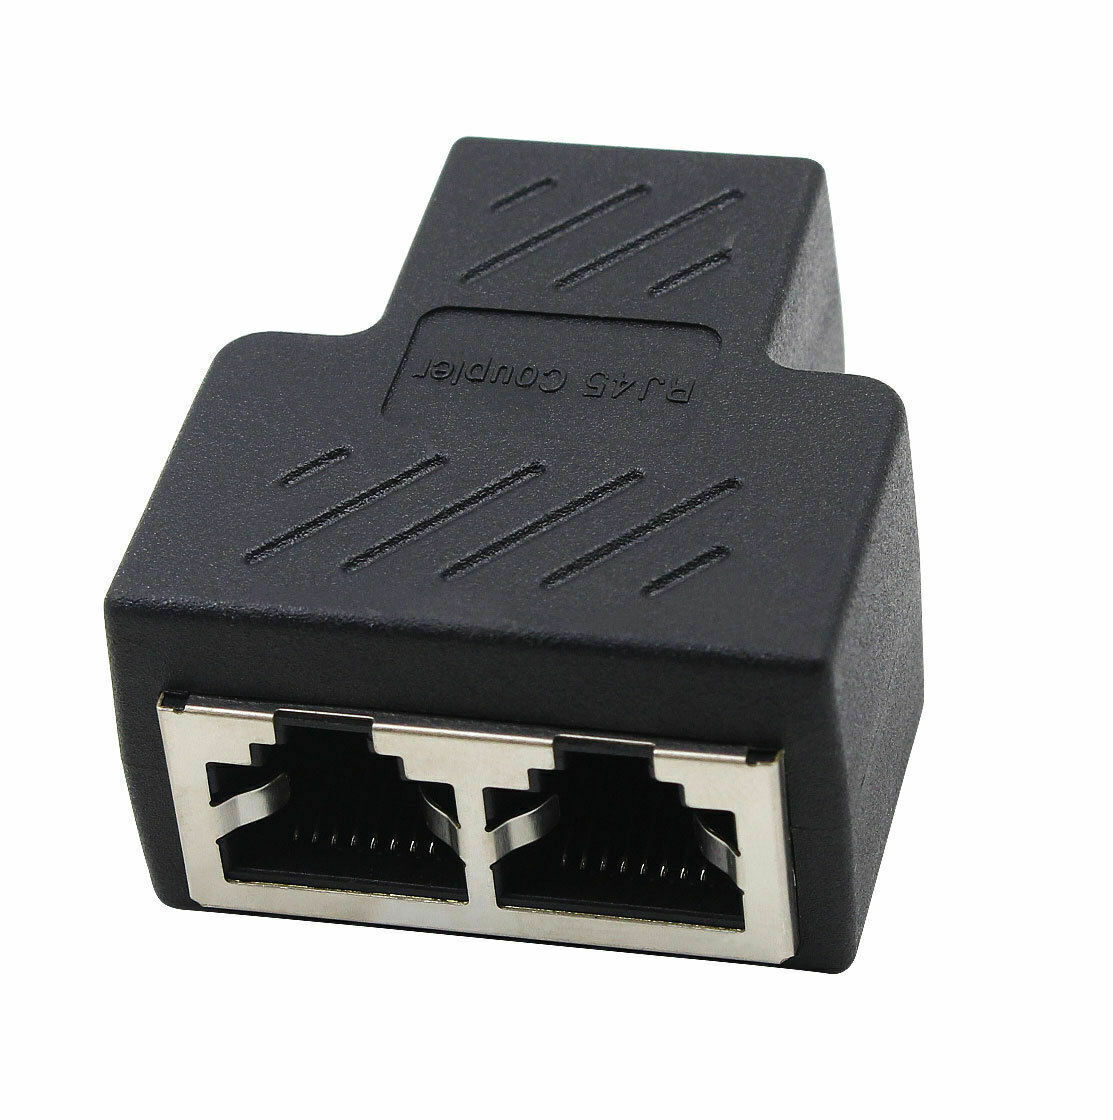 1-10X Ethernet Splitter 1 To 2 RJ45 LAN Port Internet Cable Adapter Connector